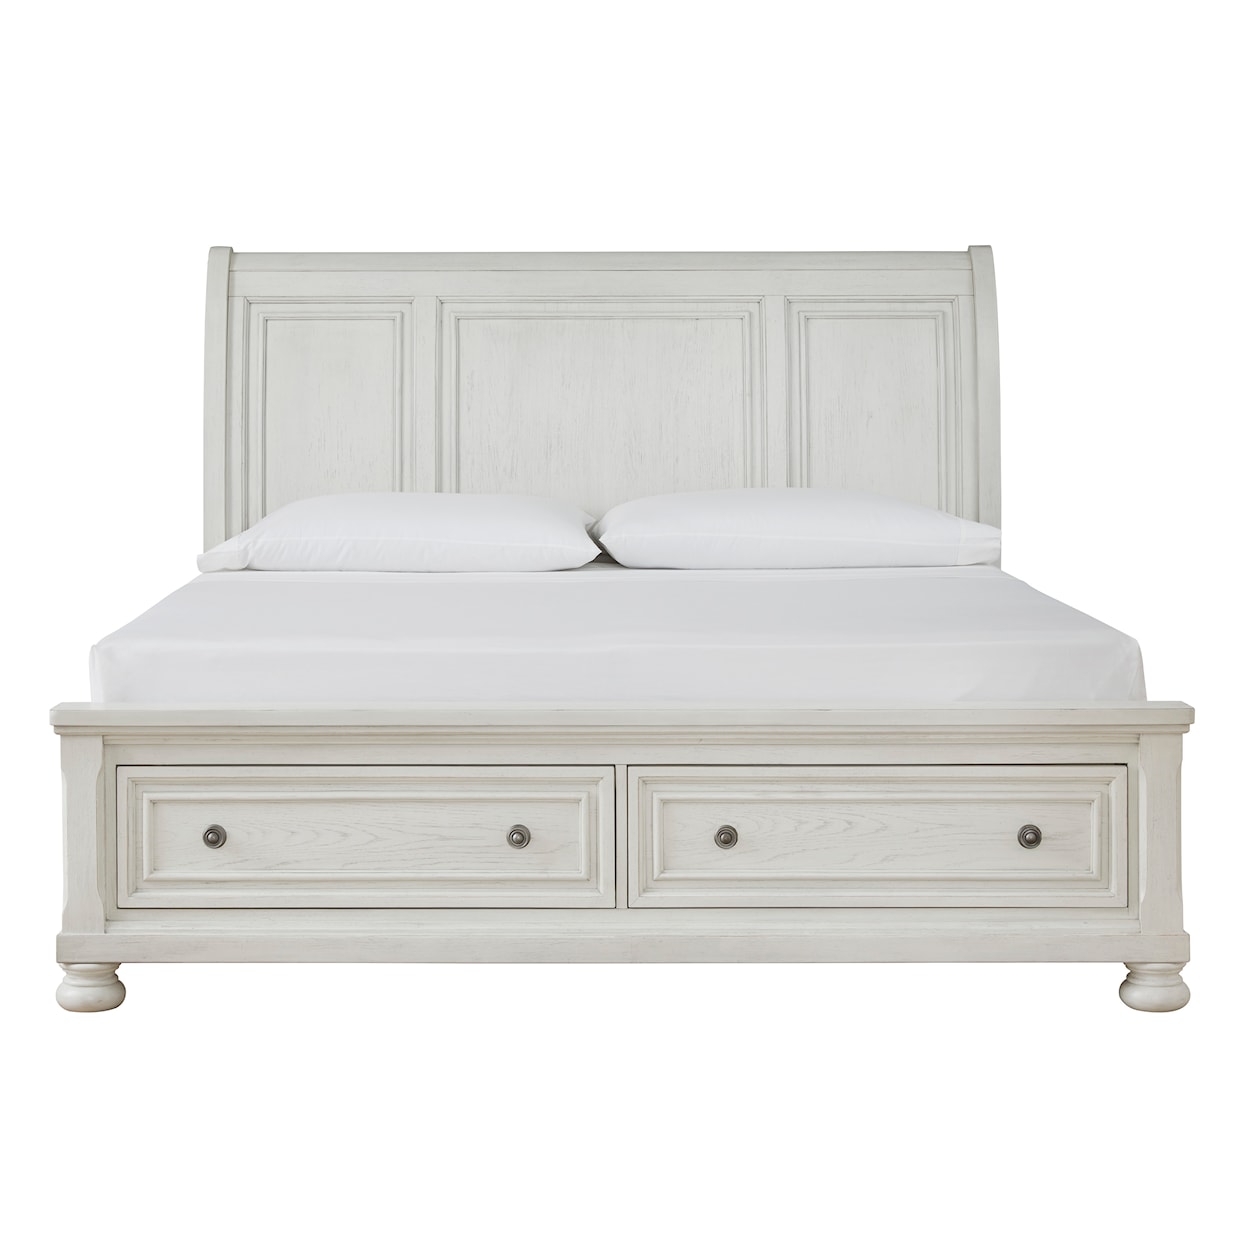 Benchcraft Robbinsdale King Sleigh Bed with Storage